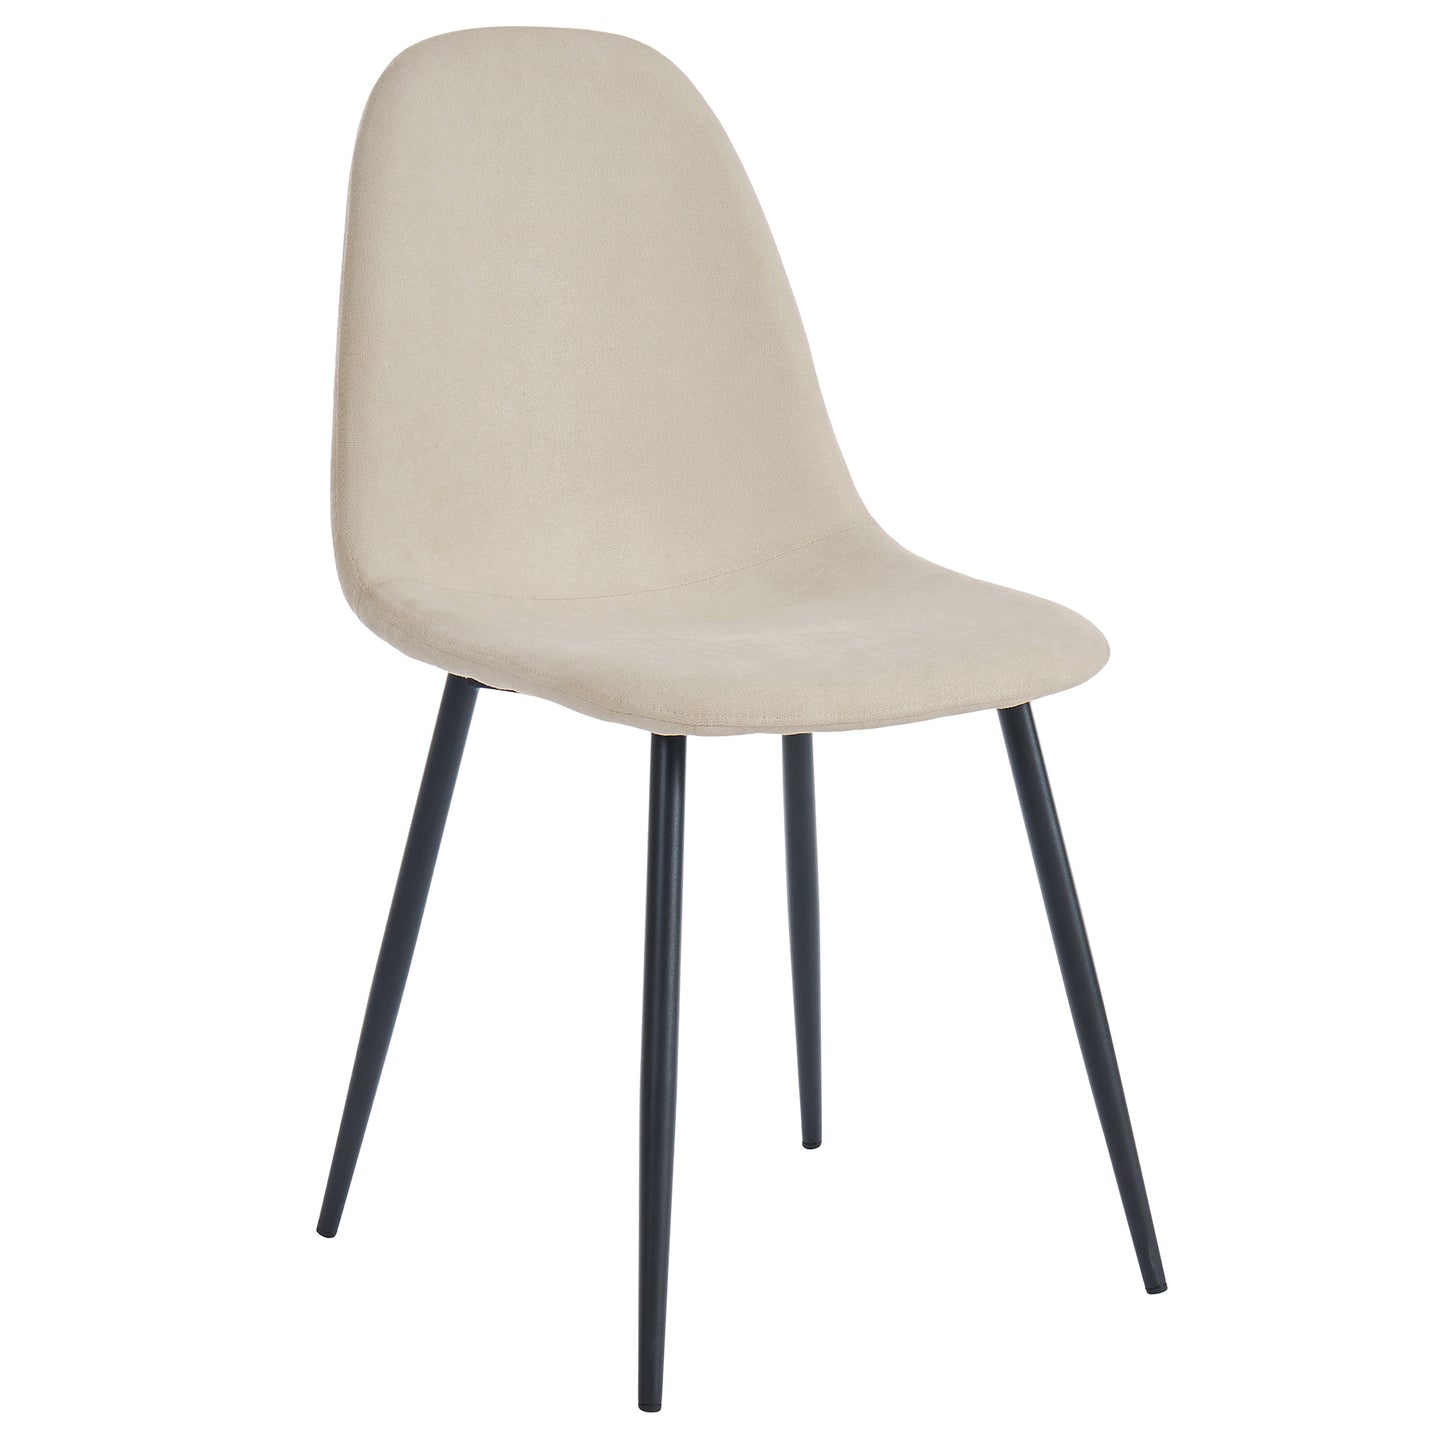 (OLLY BEIGE- 4 PACK)- FABRIC DINING CHAIRS